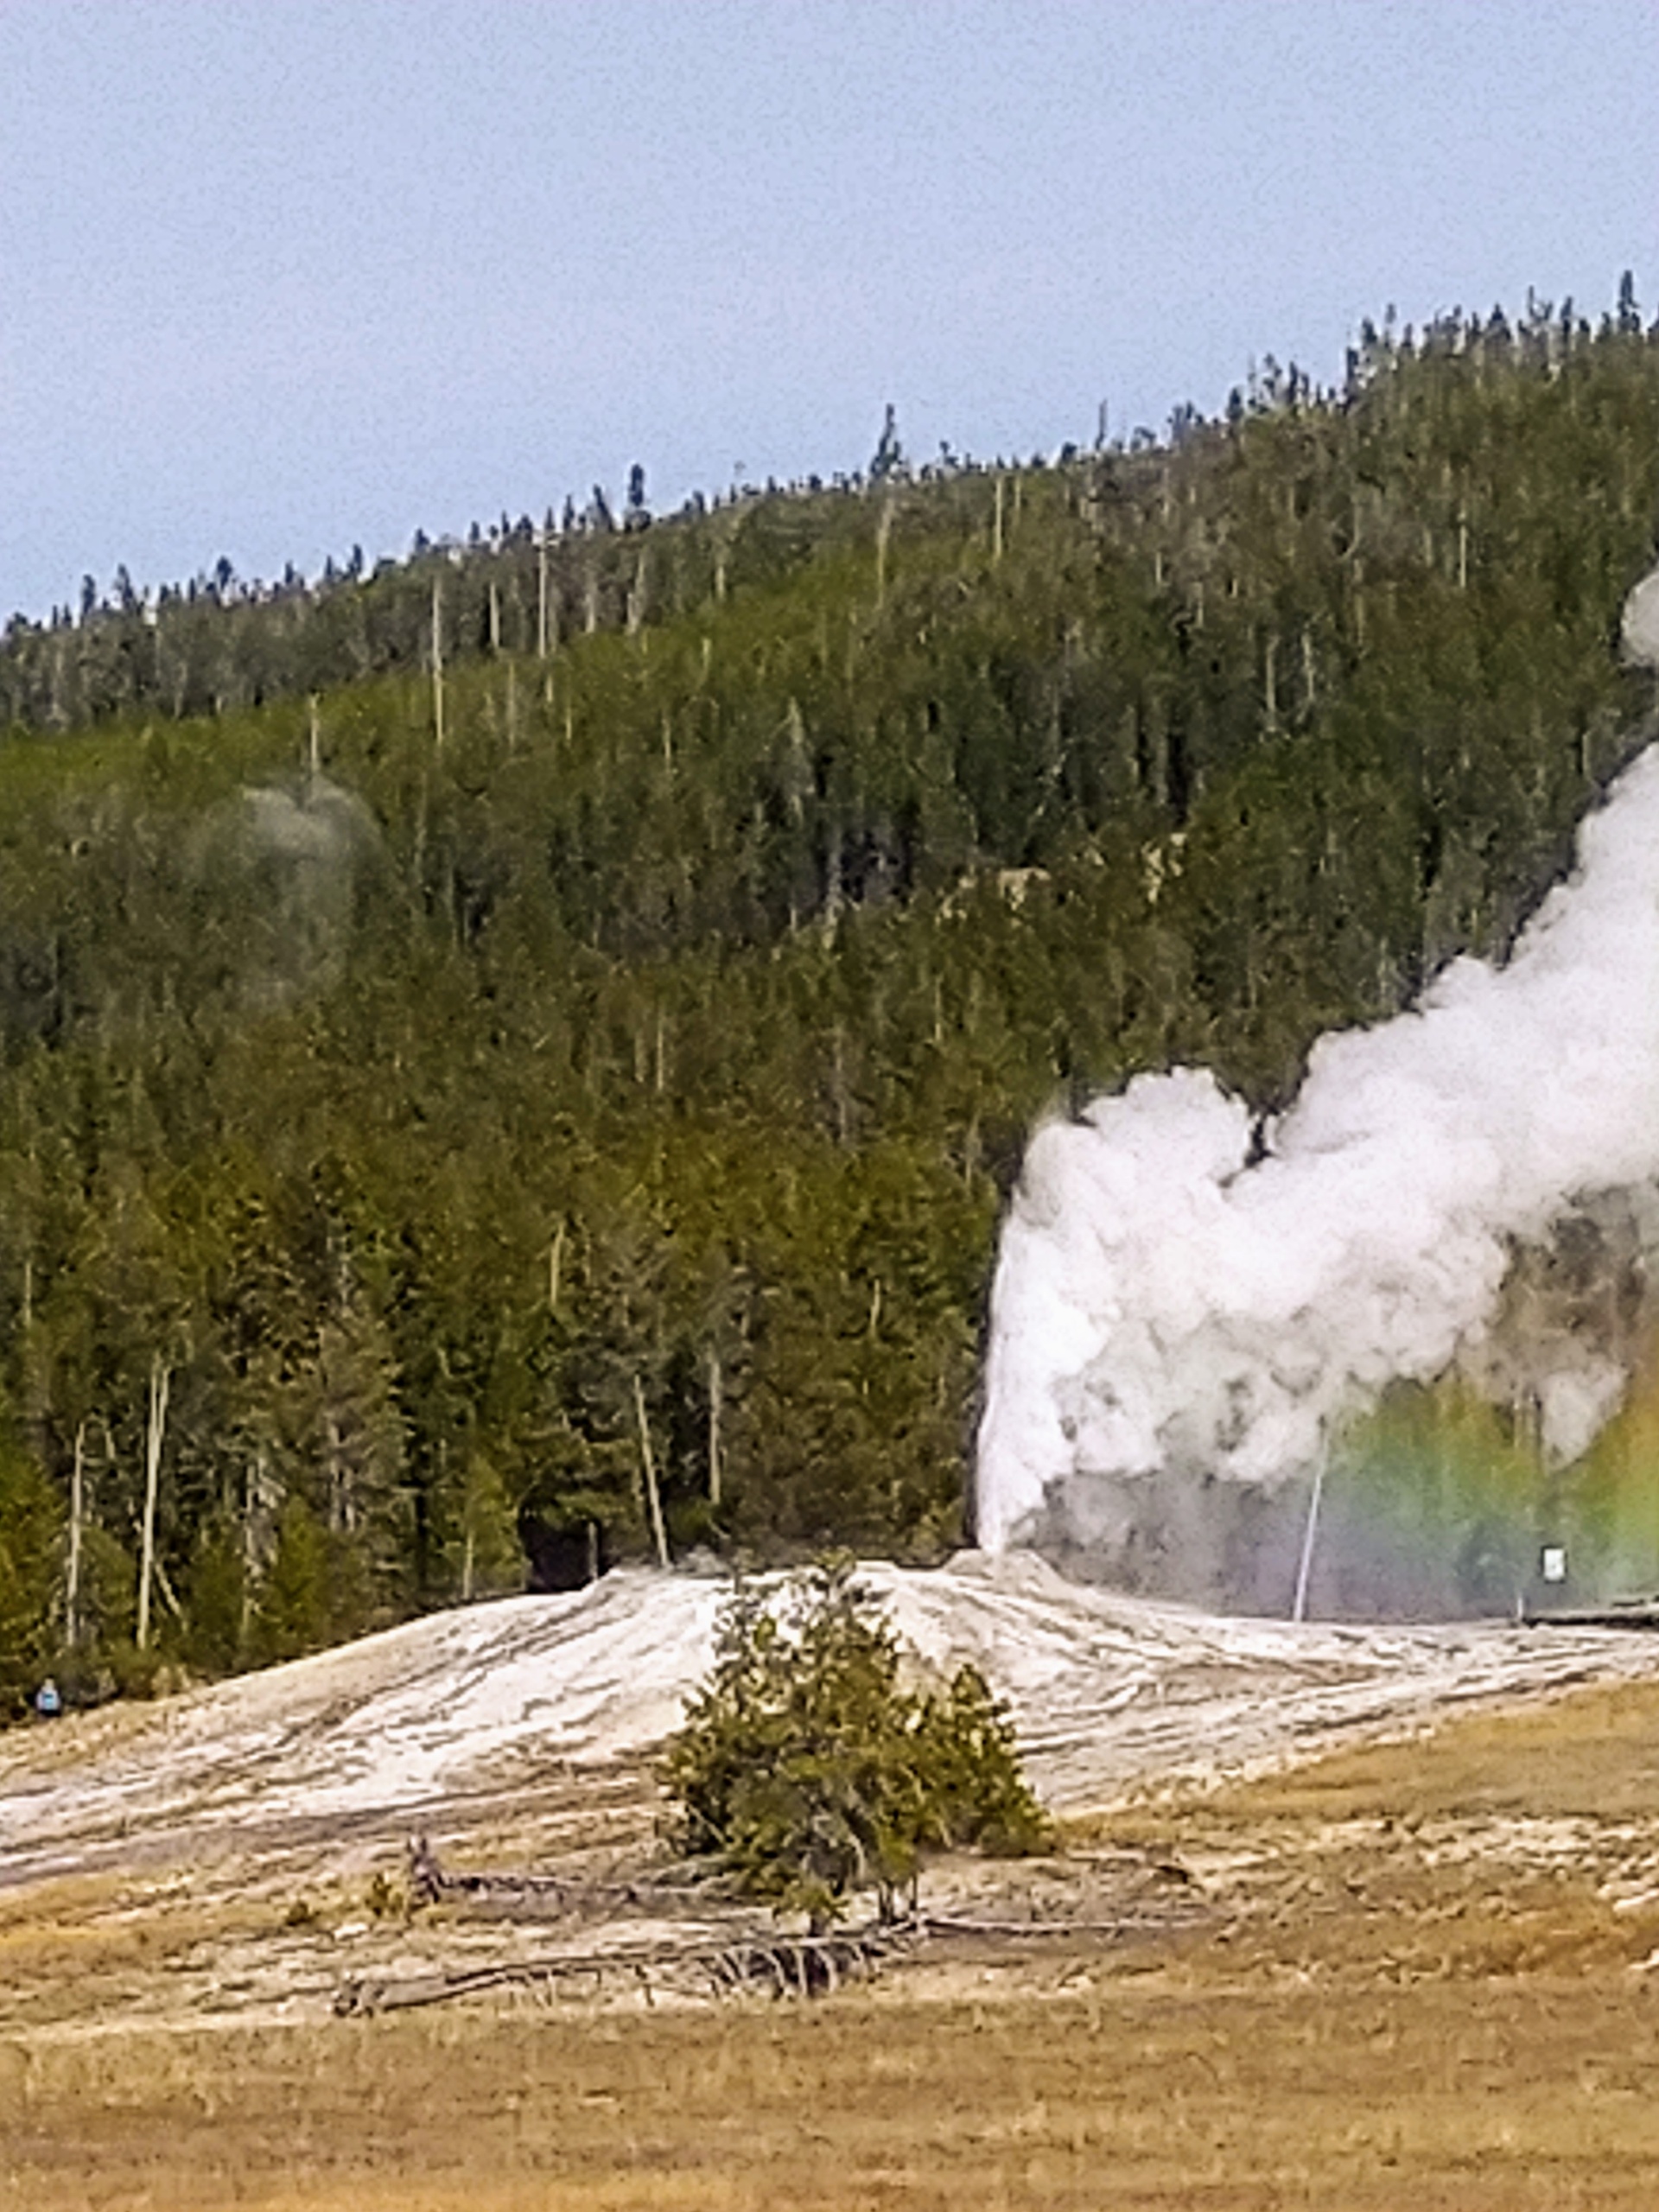 Tour The Geysers in Yellowstone National Park